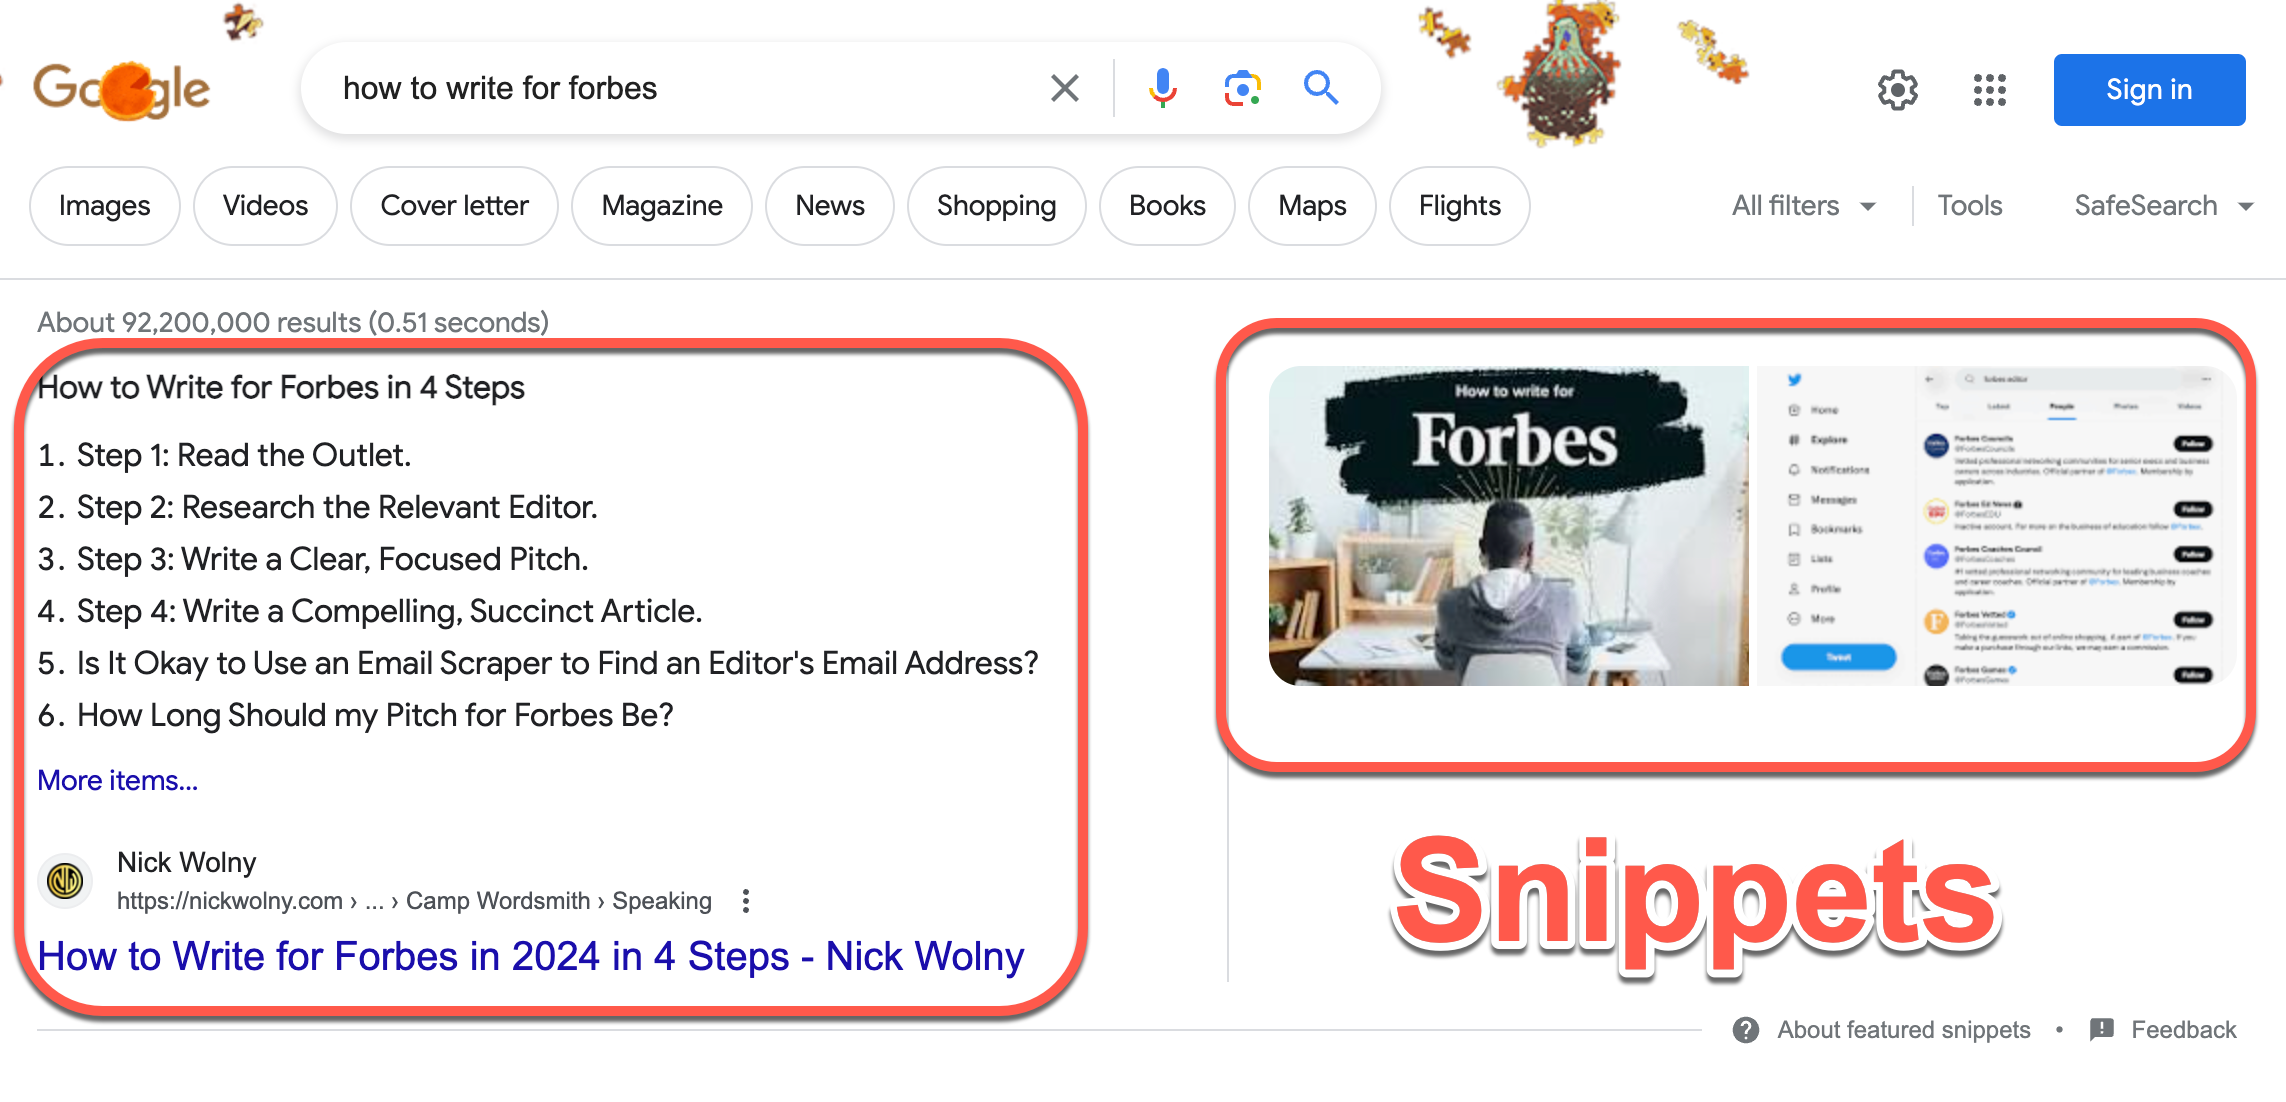 screenshot of a SERP on Google showing featured snippet to demonstrate the benefits of seo for writers